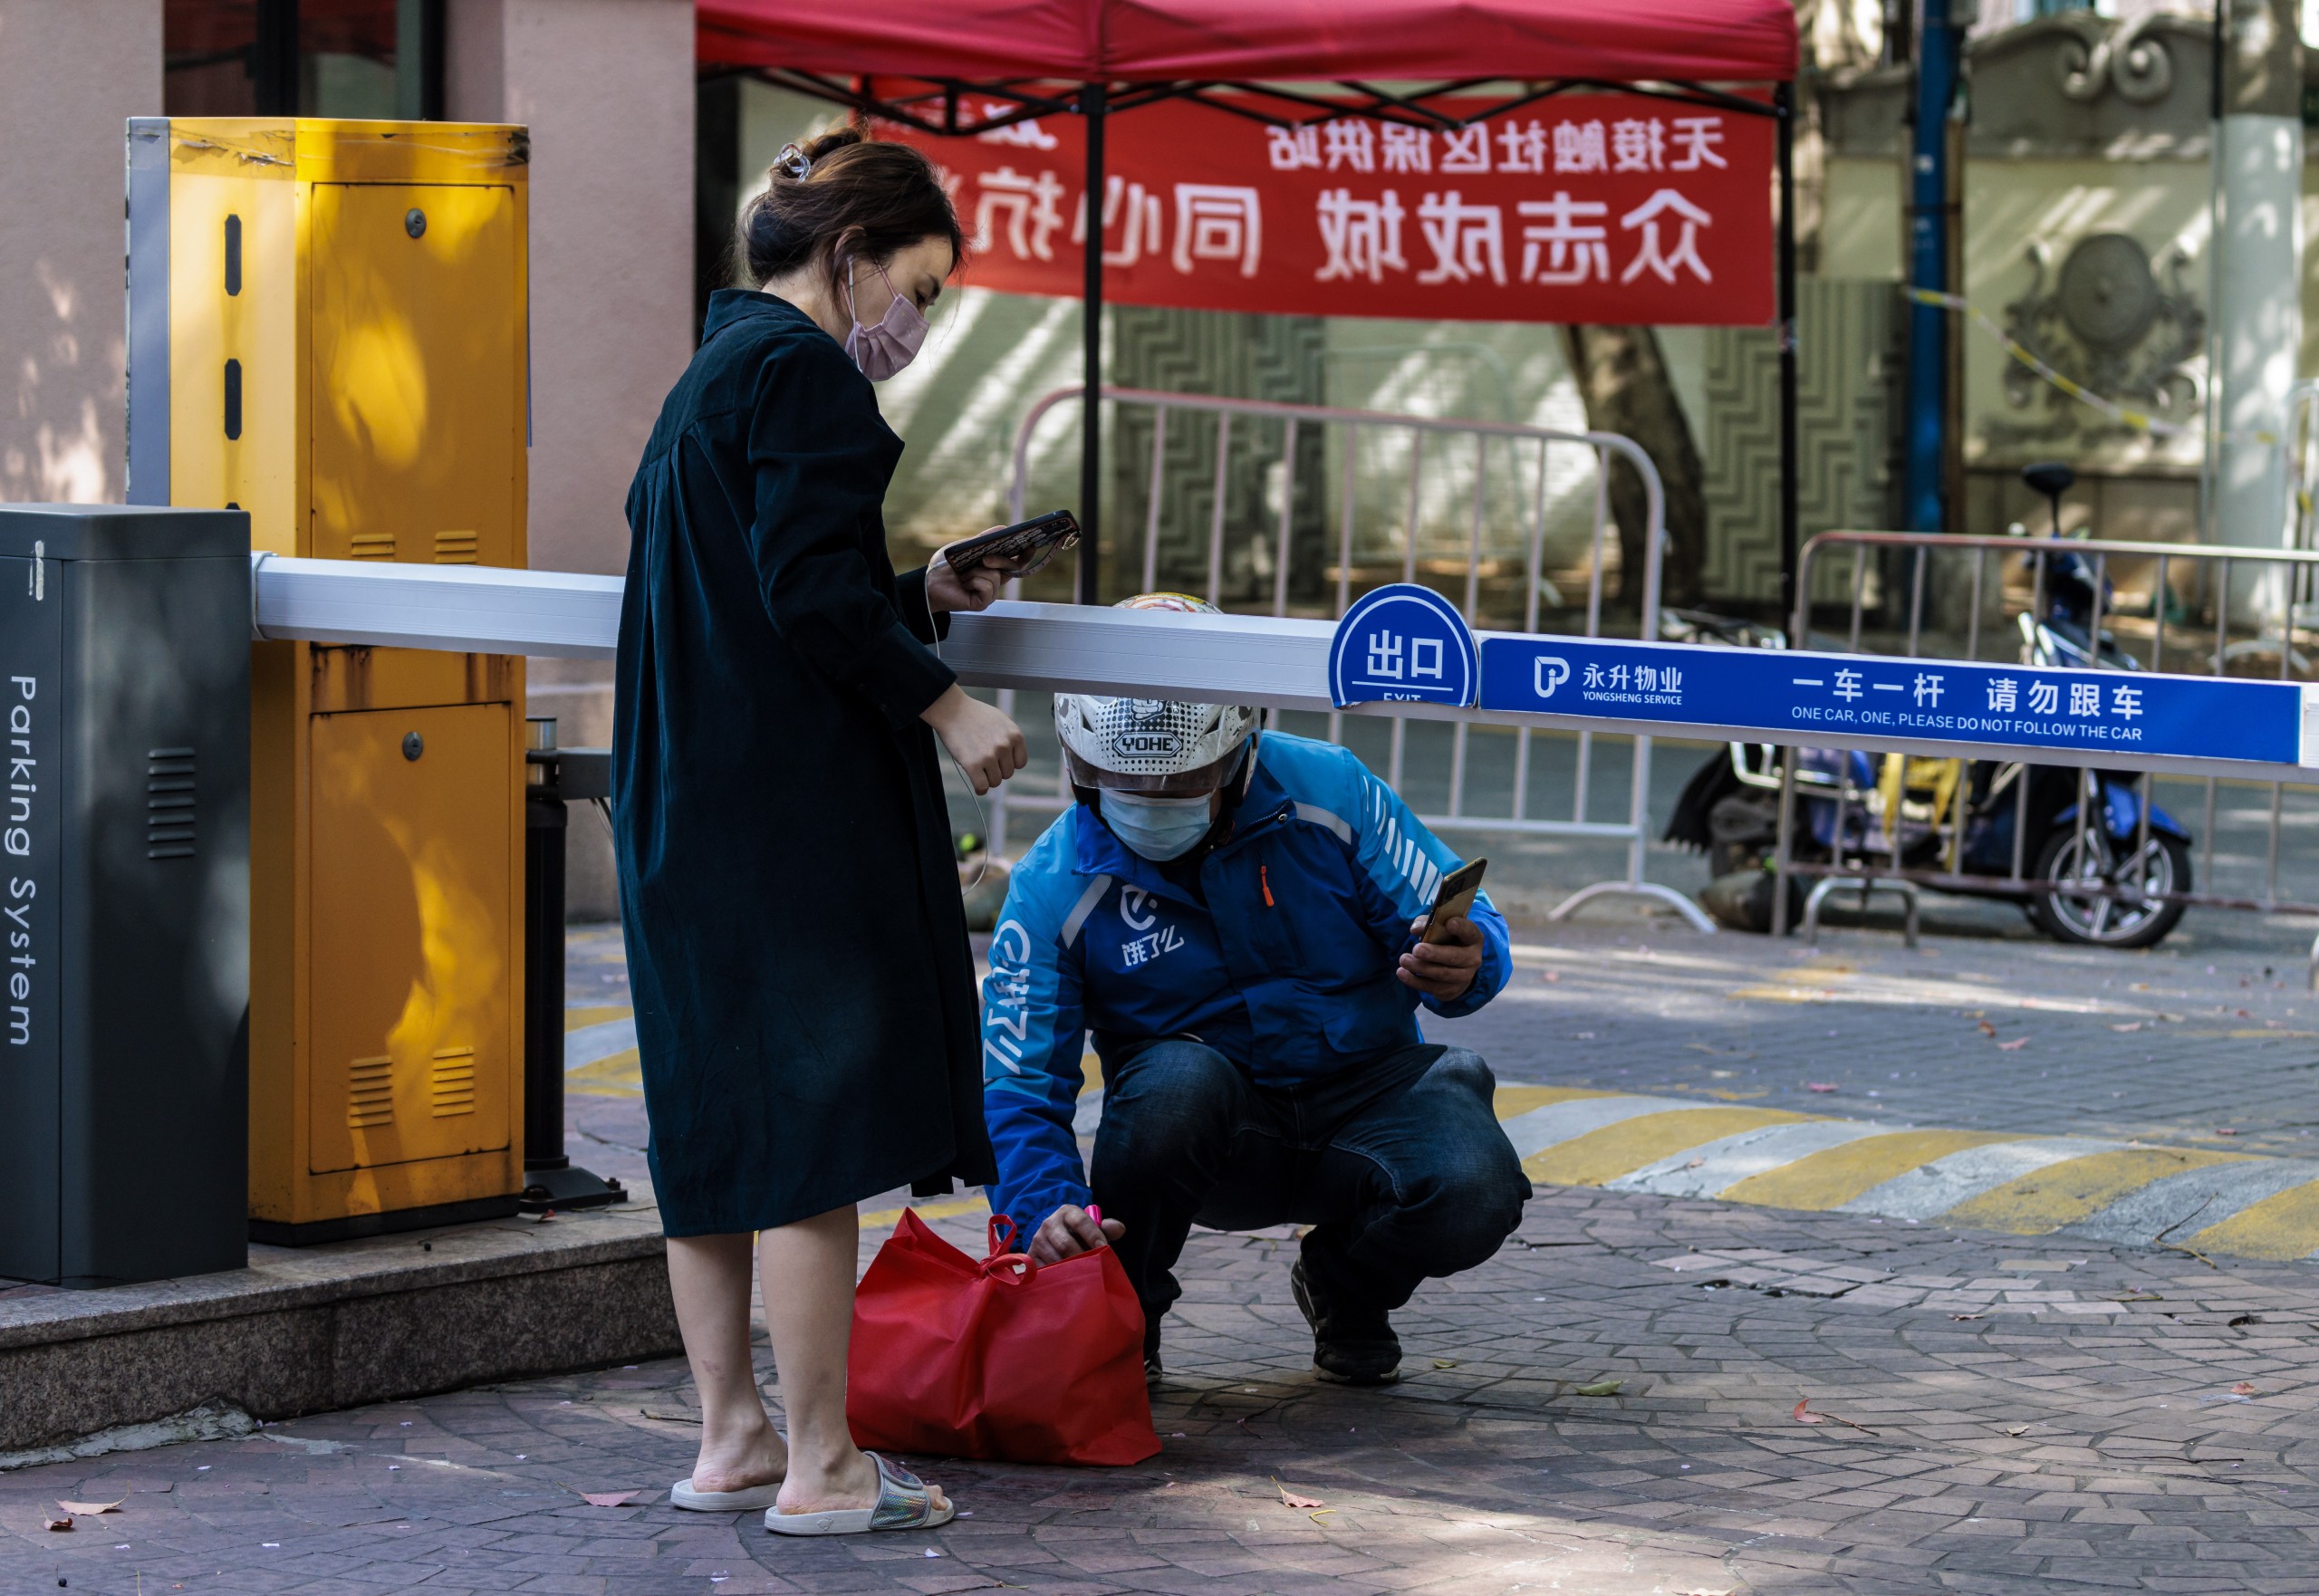 epa09895611 A woman under quarantine receives delivery in a residential community under lockdown in Shanghai, China, 18 April 2022. On 18 April 2022, in Shanghai city, there were 2.417  new locally transmitted COVID-19 cases and 19.831 local asymptomatic infections, and new local fatalities, according to the Shanghai Health Commission. On 1 April 2022, the city went into the general lockdown for 4 days. Those 4 days turned into 18 days and counting. Some of the residential buildings got released, however, the majority is still locked. Most delivery services are blocked off, leading people to fight against hunger with lack of possibility to buy groceries, and get medical care for non-Covid related diseases.  EPA/ALEX PLAVEVSKI